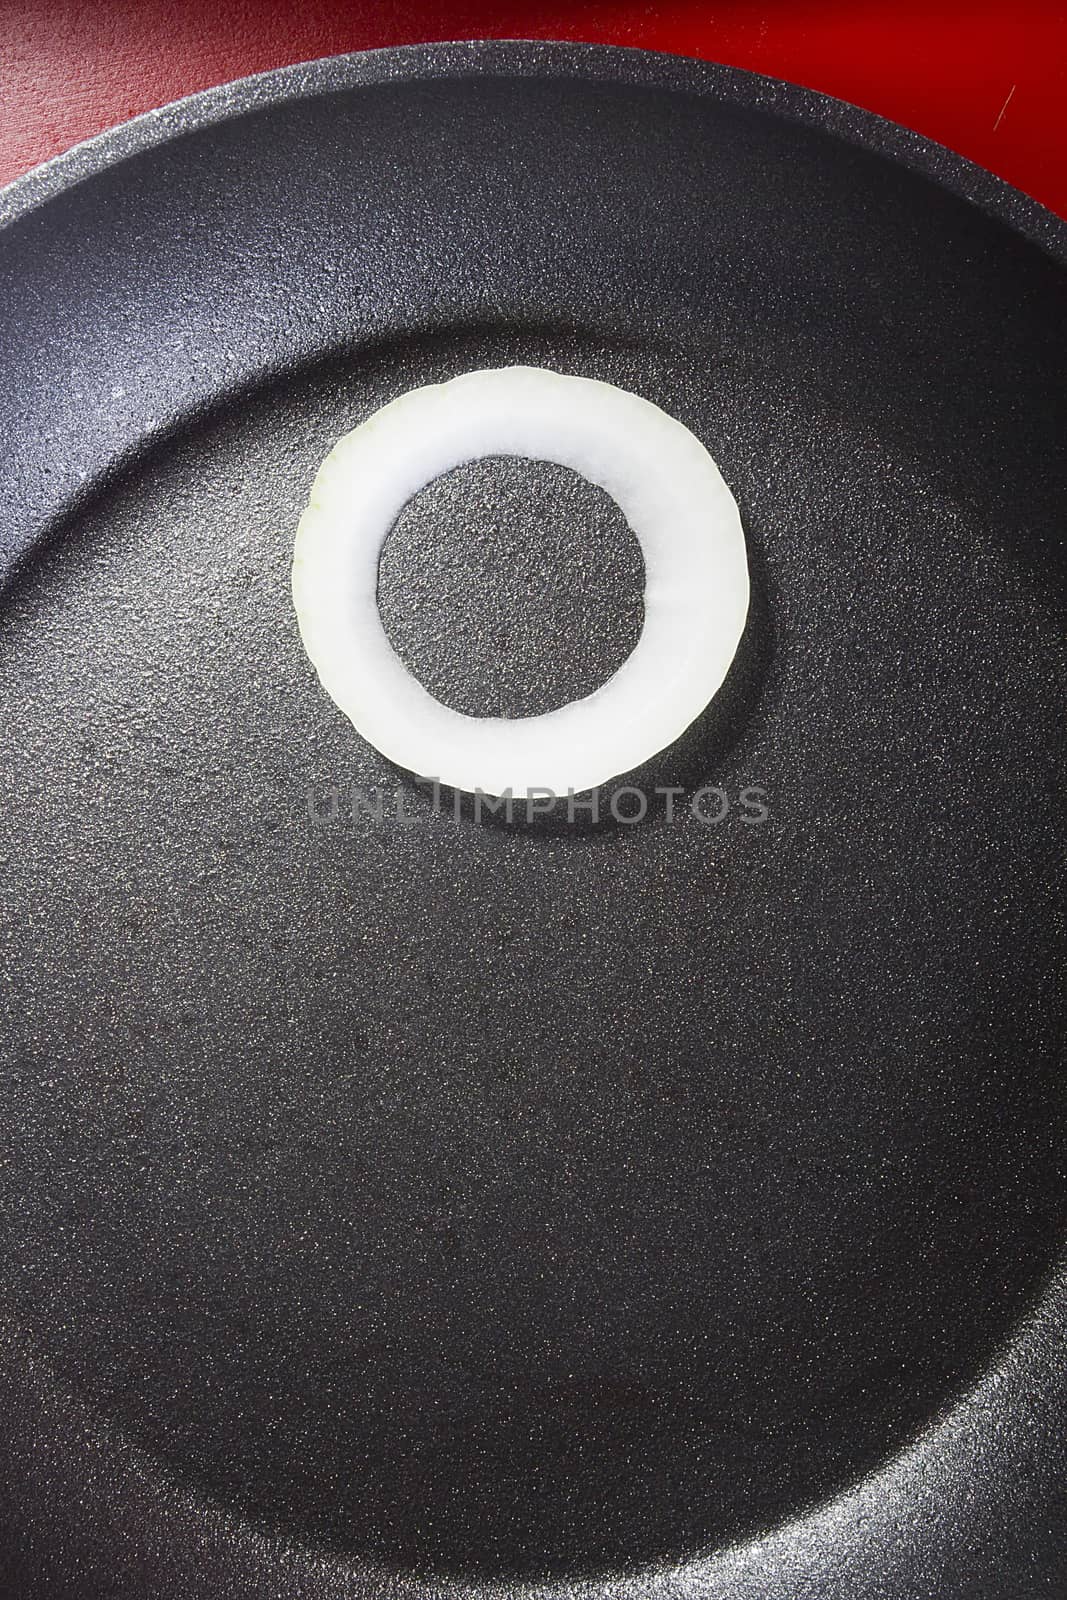 Onion ring on the surface of the pan